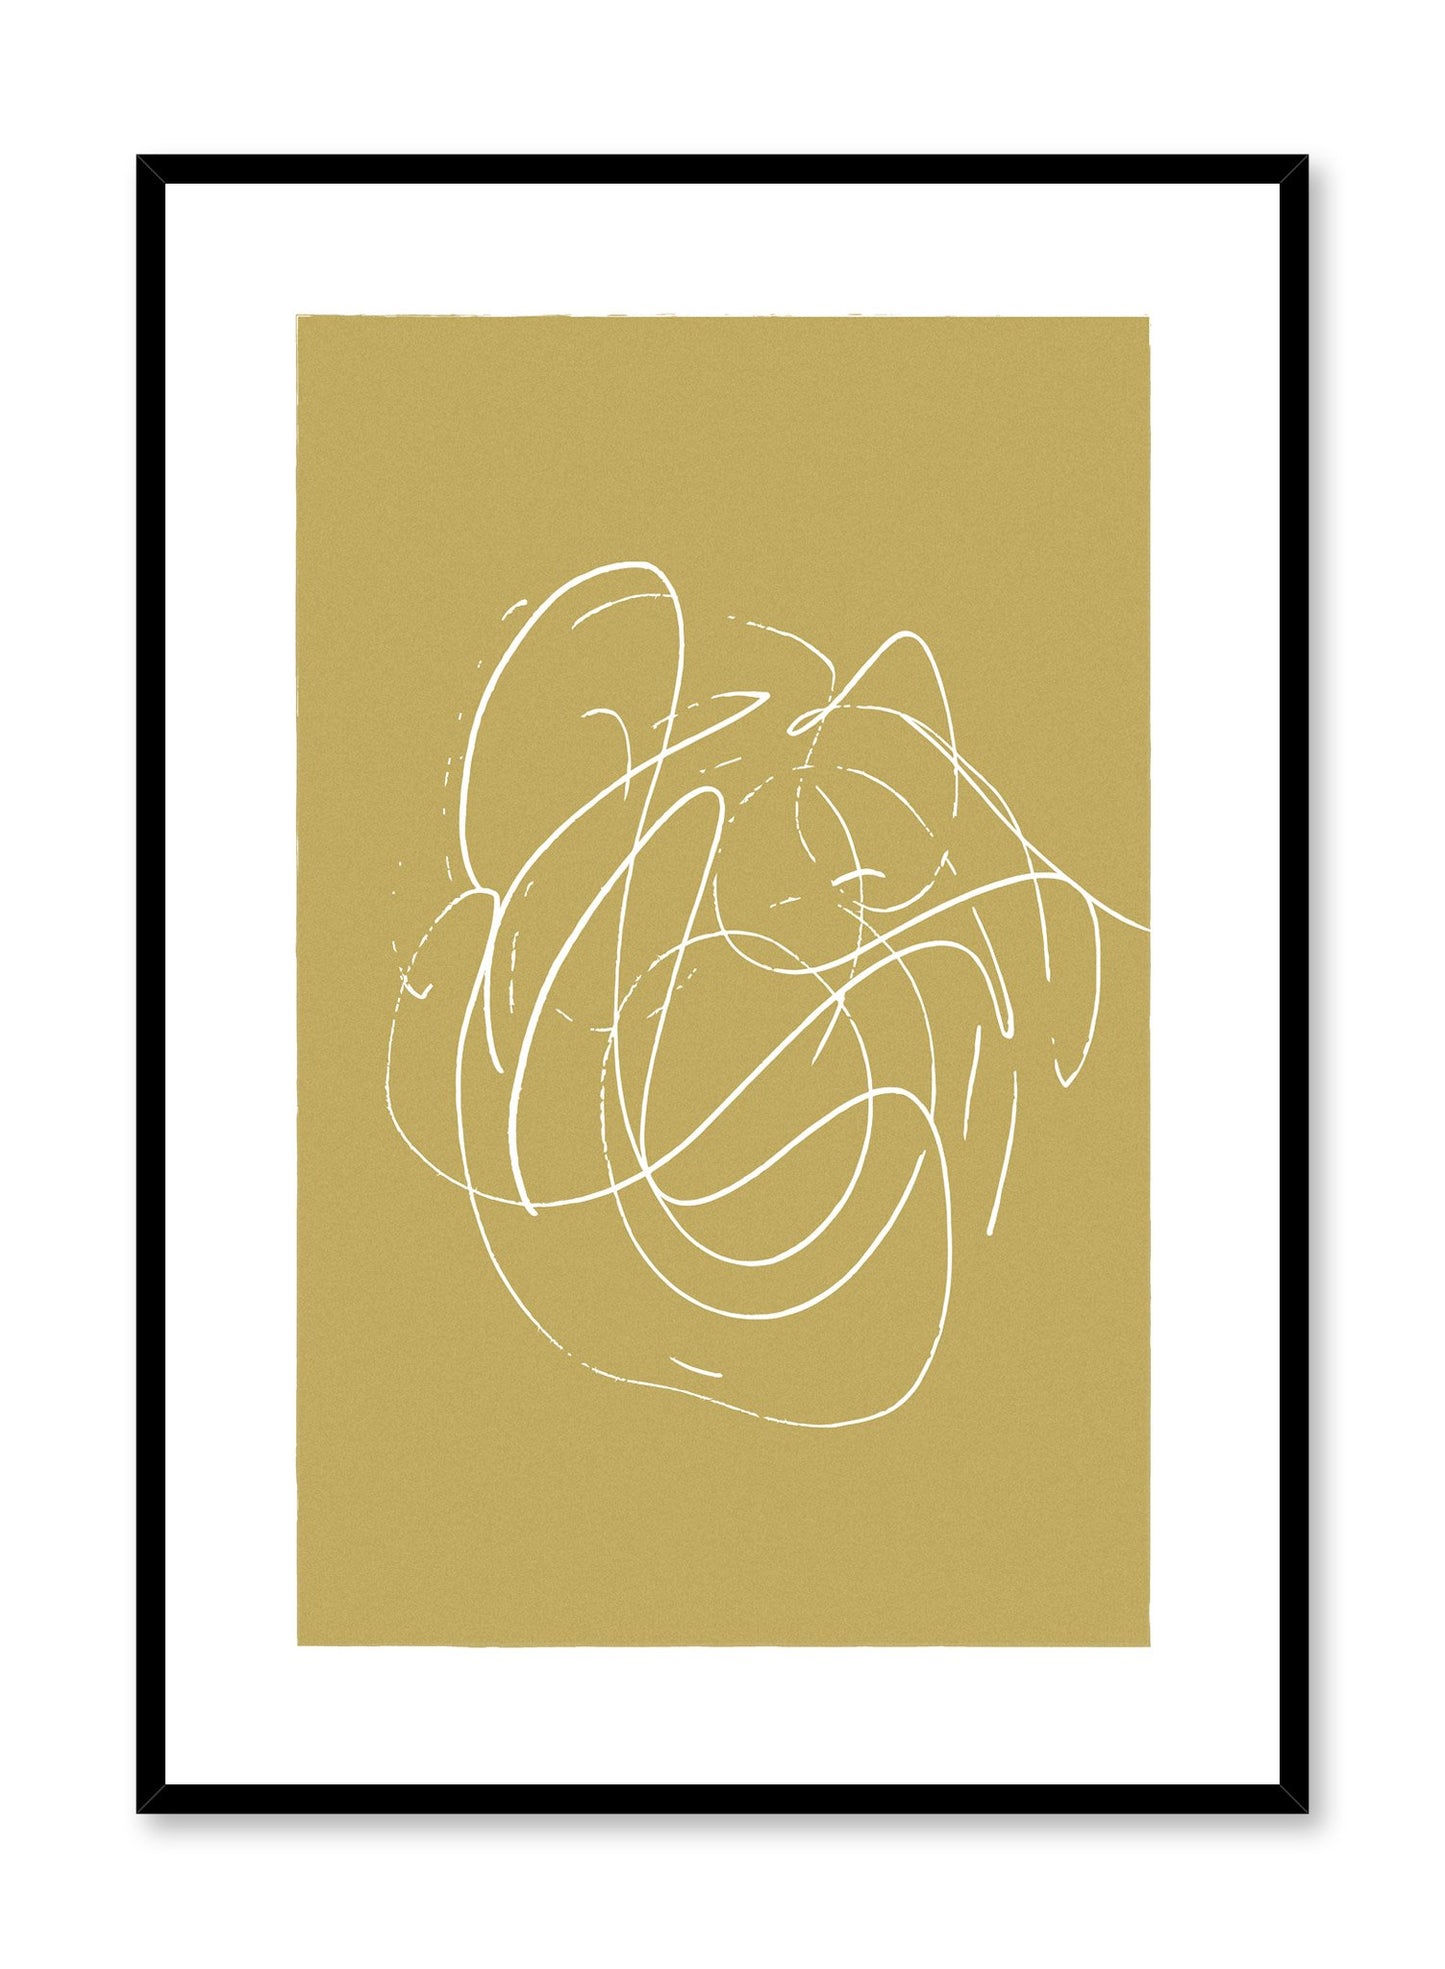 Scandinavian poster by Opposite Wall with hand-made art design with yellow swirls